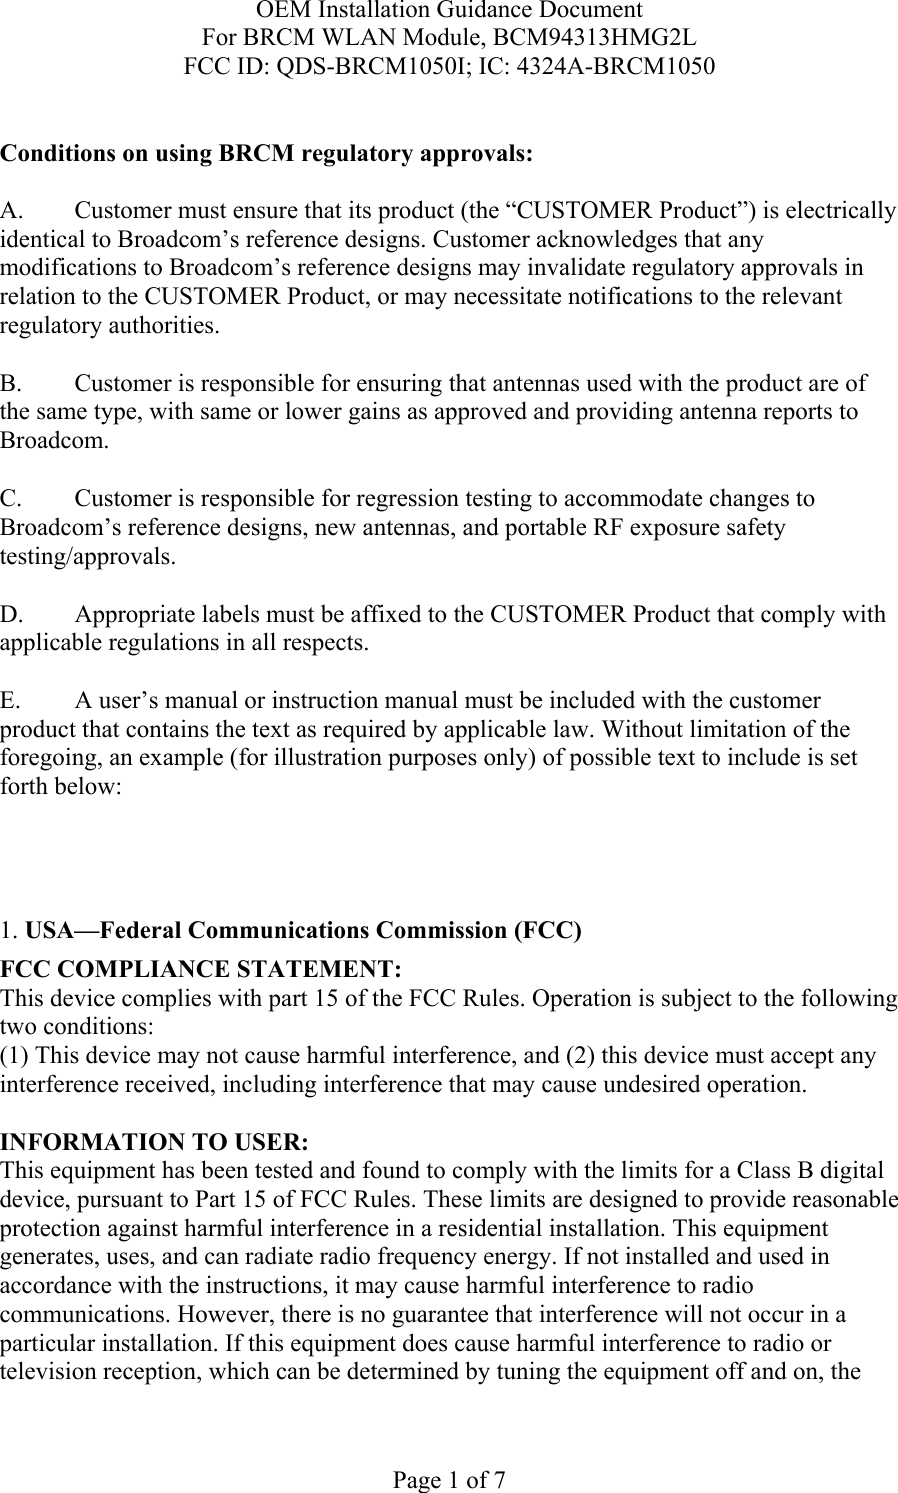 OEM Installation Guidance Document For BRCM WLAN Module, BCM94313HMG2L FCC ID: QDS-BRCM1050I; IC: 4324A-BRCM1050  Page 1 of 7  Conditions on using BRCM regulatory approvals:   A.  Customer must ensure that its product (the “CUSTOMER Product”) is electrically identical to Broadcom’s reference designs. Customer acknowledges that any modifications to Broadcom’s reference designs may invalidate regulatory approvals in relation to the CUSTOMER Product, or may necessitate notifications to the relevant regulatory authorities.  B.   Customer is responsible for ensuring that antennas used with the product are of the same type, with same or lower gains as approved and providing antenna reports to Broadcom.  C.   Customer is responsible for regression testing to accommodate changes to Broadcom’s reference designs, new antennas, and portable RF exposure safety testing/approvals.  D.  Appropriate labels must be affixed to the CUSTOMER Product that comply with applicable regulations in all respects.    E.  A user’s manual or instruction manual must be included with the customer product that contains the text as required by applicable law. Without limitation of the foregoing, an example (for illustration purposes only) of possible text to include is set forth below:      1. USA—Federal Communications Commission (FCC) FCC COMPLIANCE STATEMENT: This device complies with part 15 of the FCC Rules. Operation is subject to the following two conditions: (1) This device may not cause harmful interference, and (2) this device must accept any interference received, including interference that may cause undesired operation.  INFORMATION TO USER: This equipment has been tested and found to comply with the limits for a Class B digital device, pursuant to Part 15 of FCC Rules. These limits are designed to provide reasonable protection against harmful interference in a residential installation. This equipment generates, uses, and can radiate radio frequency energy. If not installed and used in accordance with the instructions, it may cause harmful interference to radio communications. However, there is no guarantee that interference will not occur in a particular installation. If this equipment does cause harmful interference to radio or television reception, which can be determined by tuning the equipment off and on, the 